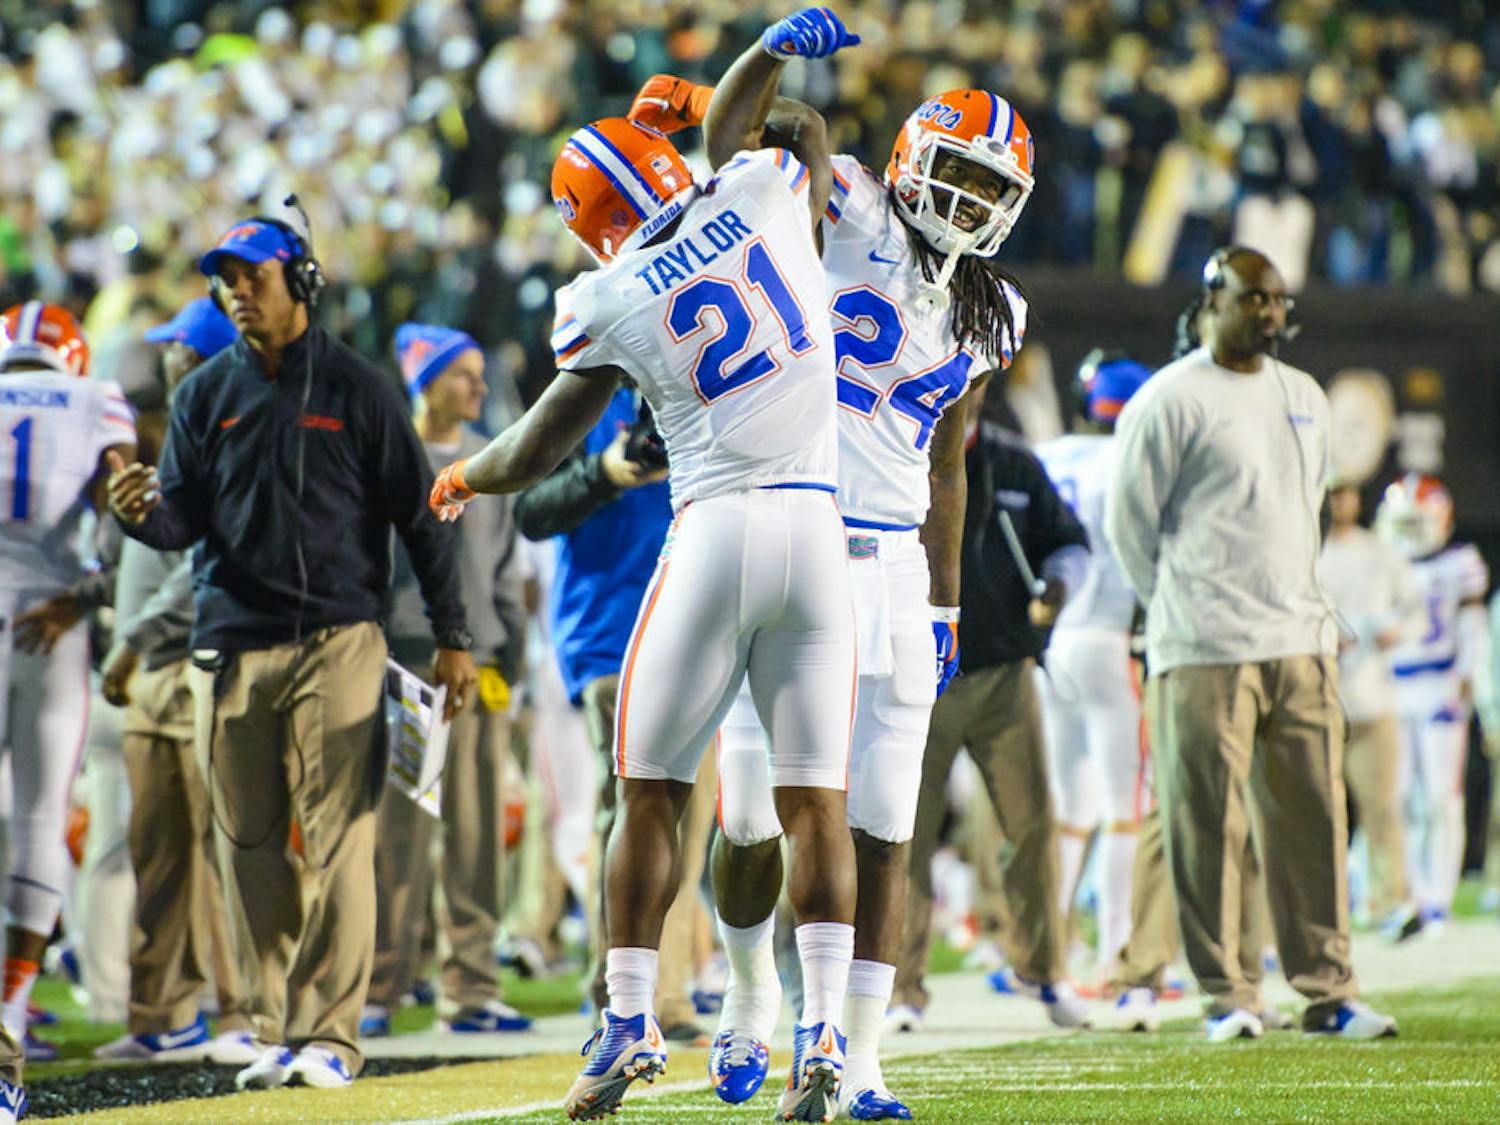 Florida running back Kelvin Taylor (21) celebrates with running back Matt Jones (24) following Taylor's touchdown in the first quarter of Gators' 34-10 win against Commodores on Saturday in Nashville, Tennessee.